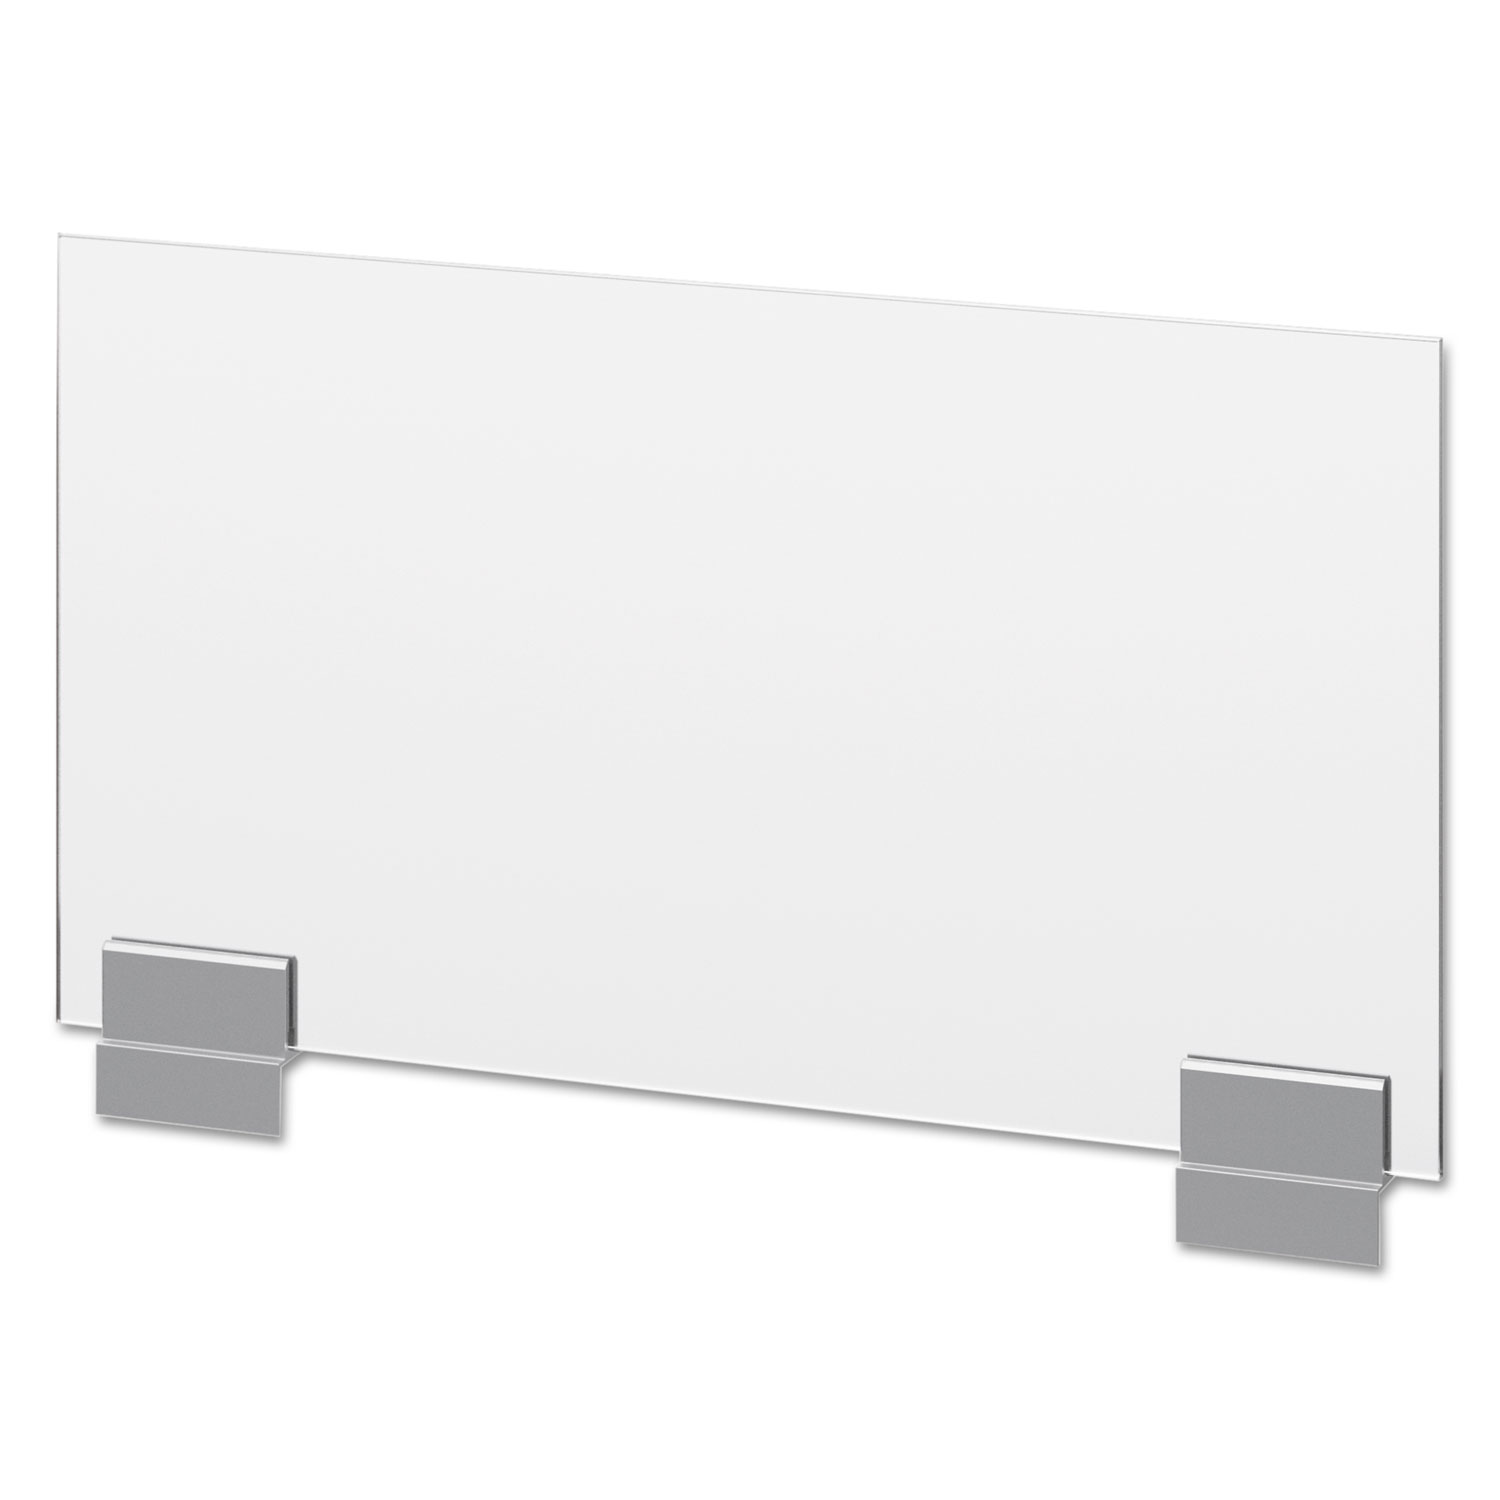 Voi Frosted Glass Side Privacy Screen, 24w x 12h